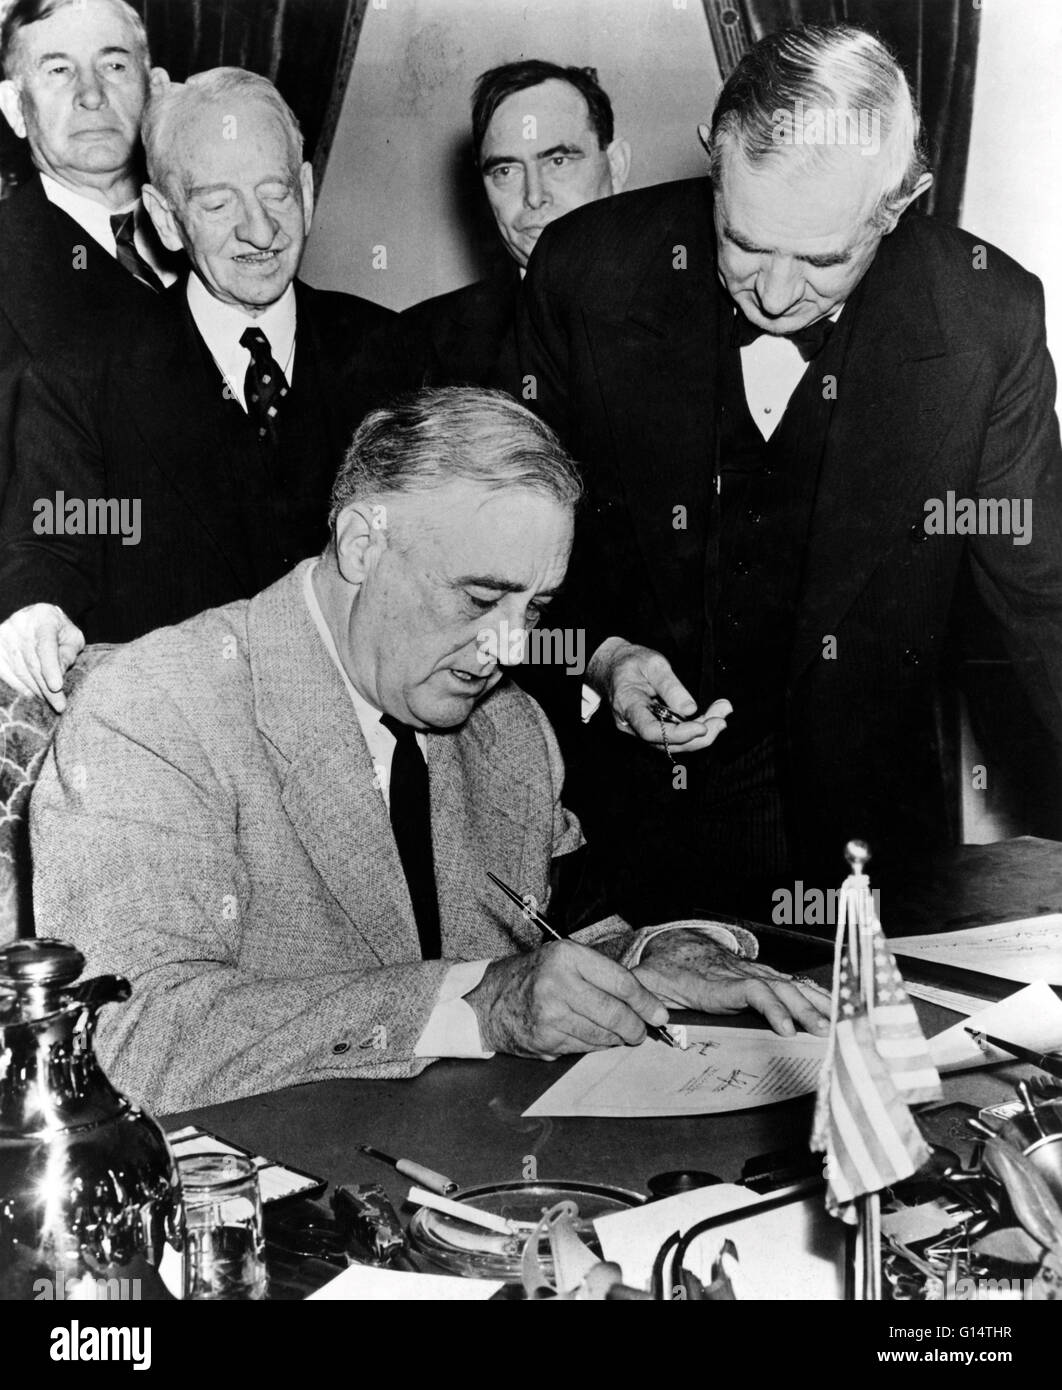 President Roosevelt signing the declaration of war against Japan in 1941. Franklin Delano Roosevelt (January 30, 1882 - April 12, 1945) was the 32nd President of the United States (1933-1945) and a central figure in world events during the mid-20th centur Stock Photo